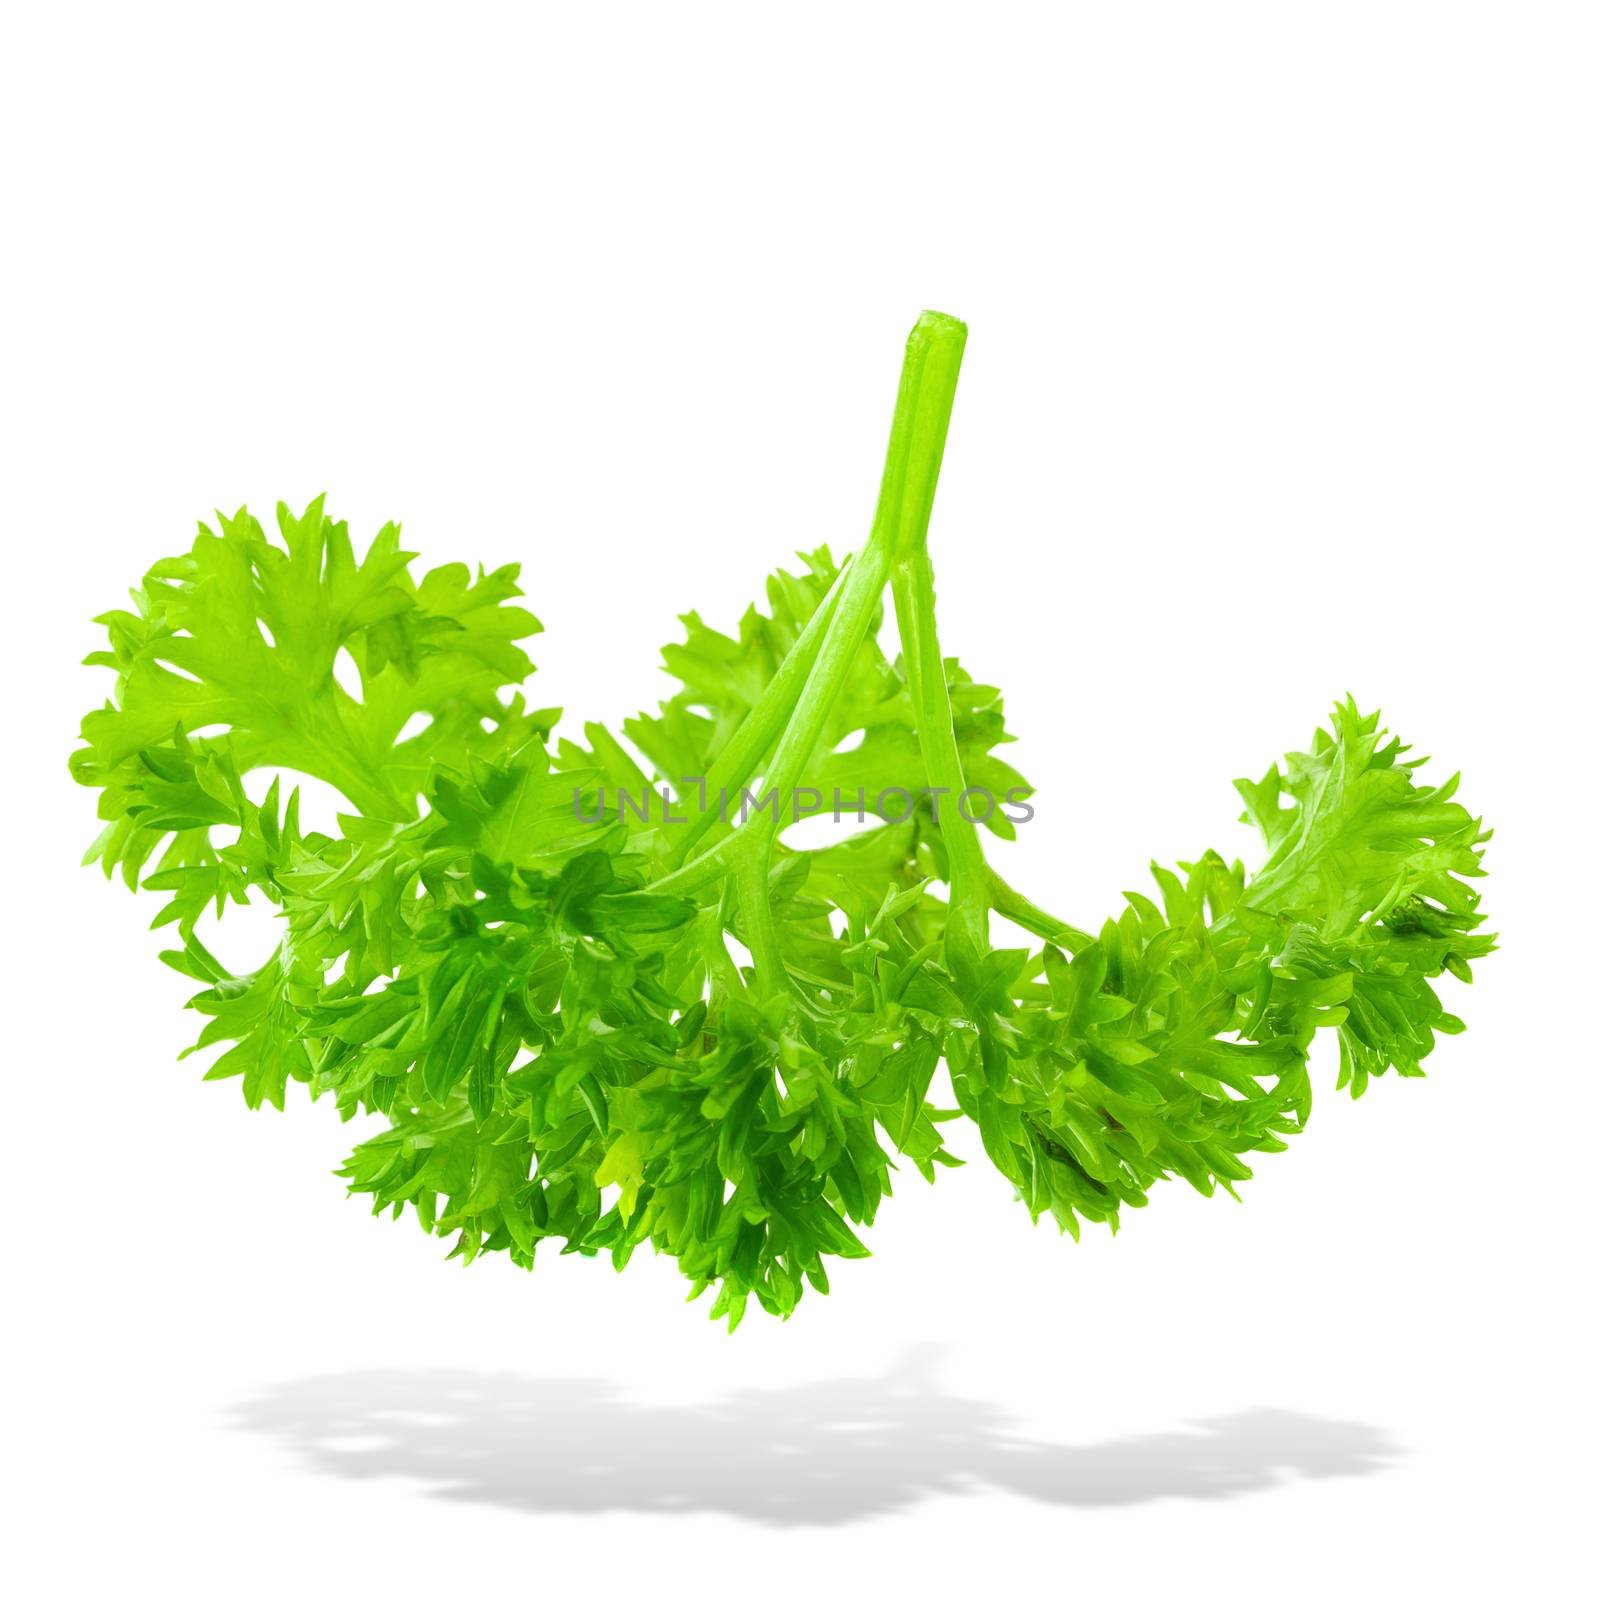 Fresh branch of green parsley natural food isolated on white bac by kaiskynet